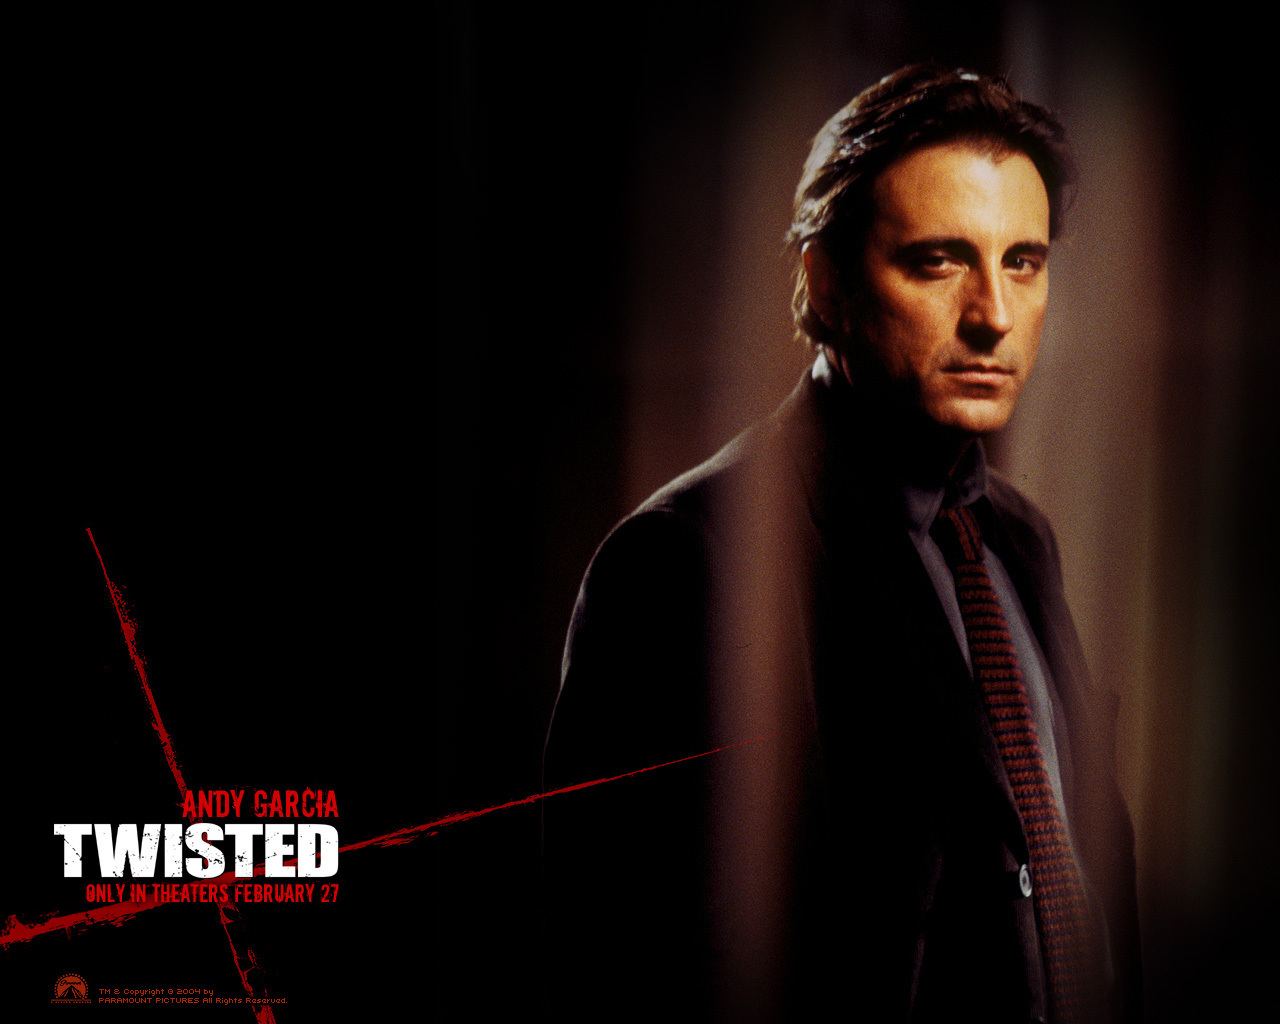 Andy Garcia Image HD Wallpaper And Background Photos